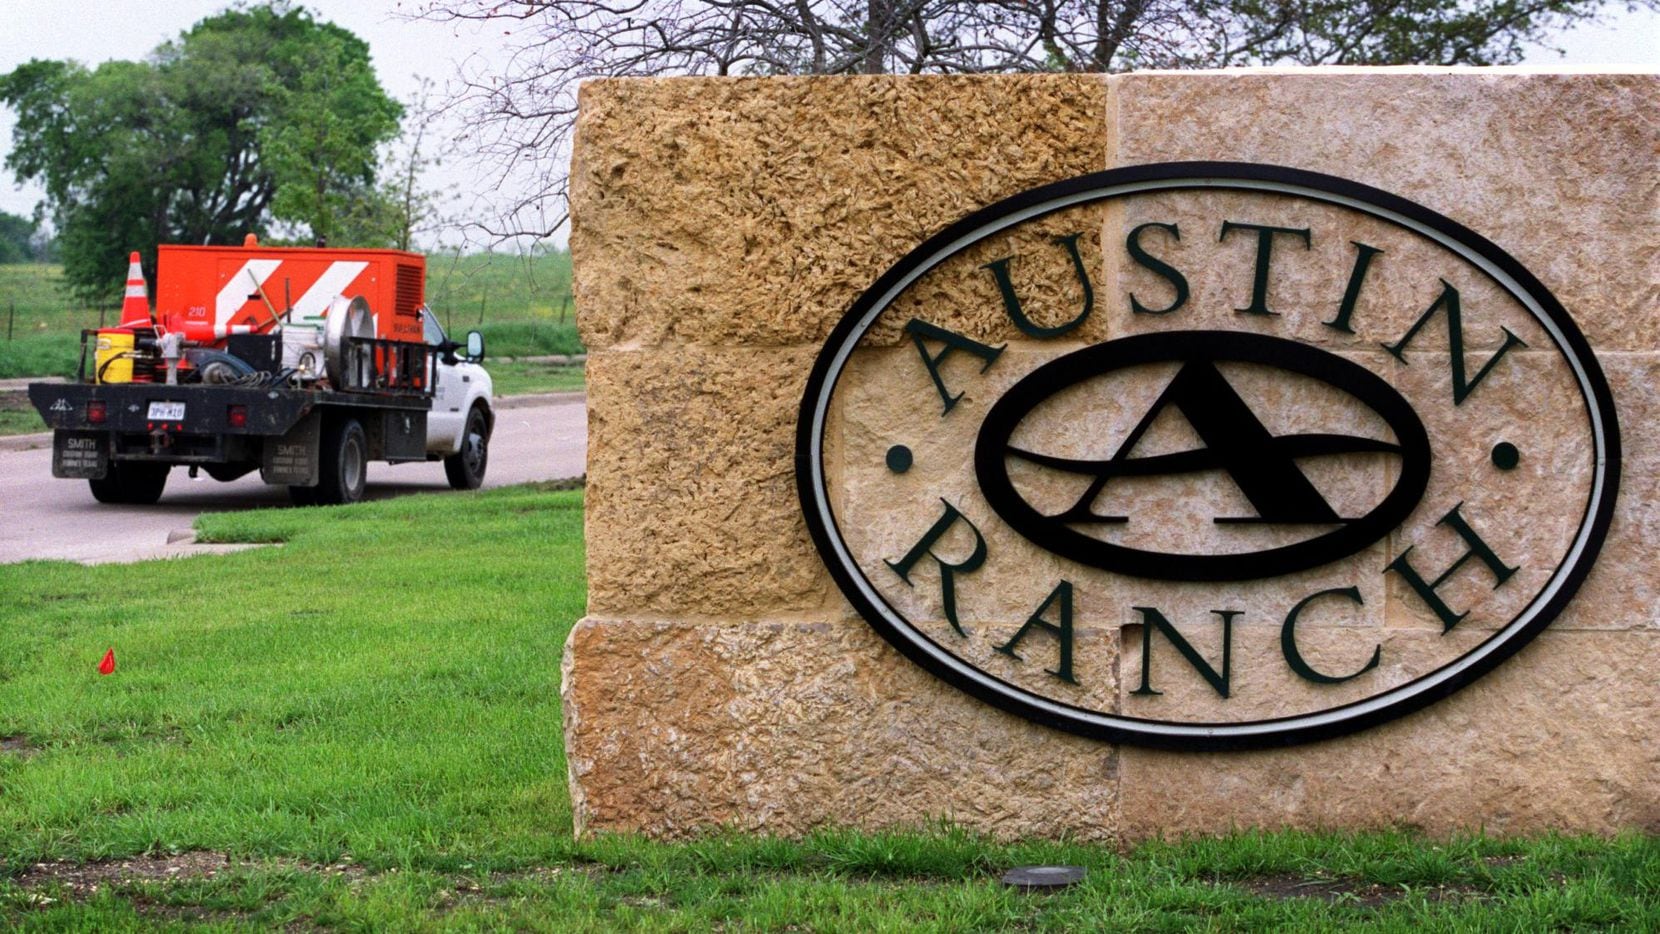 Austin Ranch is west of the Dallas North Tollway and has 1,700 acres.